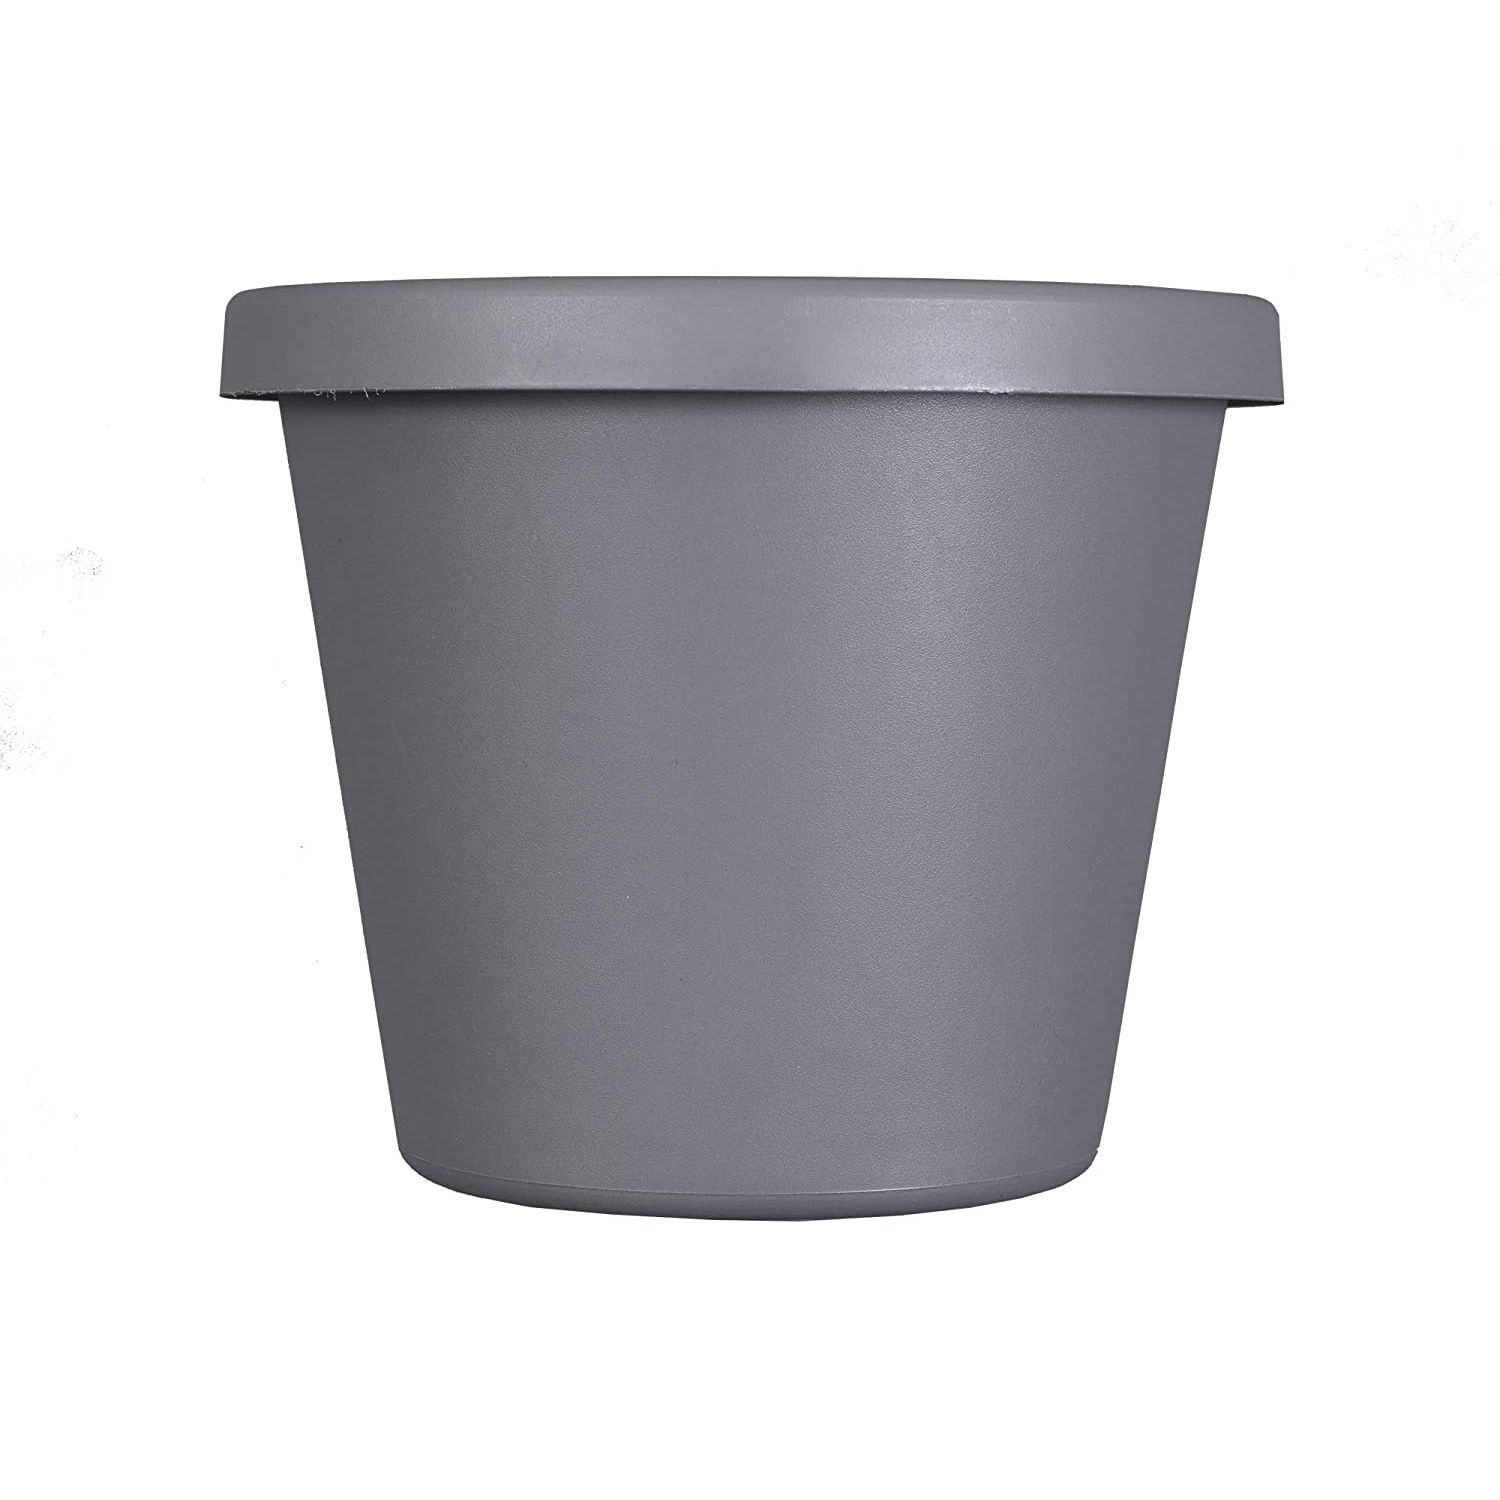 The HC Companies 24-in x 24-in Blue Resin Low Bowl Planter with Drainage Holes in the Pots Planters department at Lowes.com